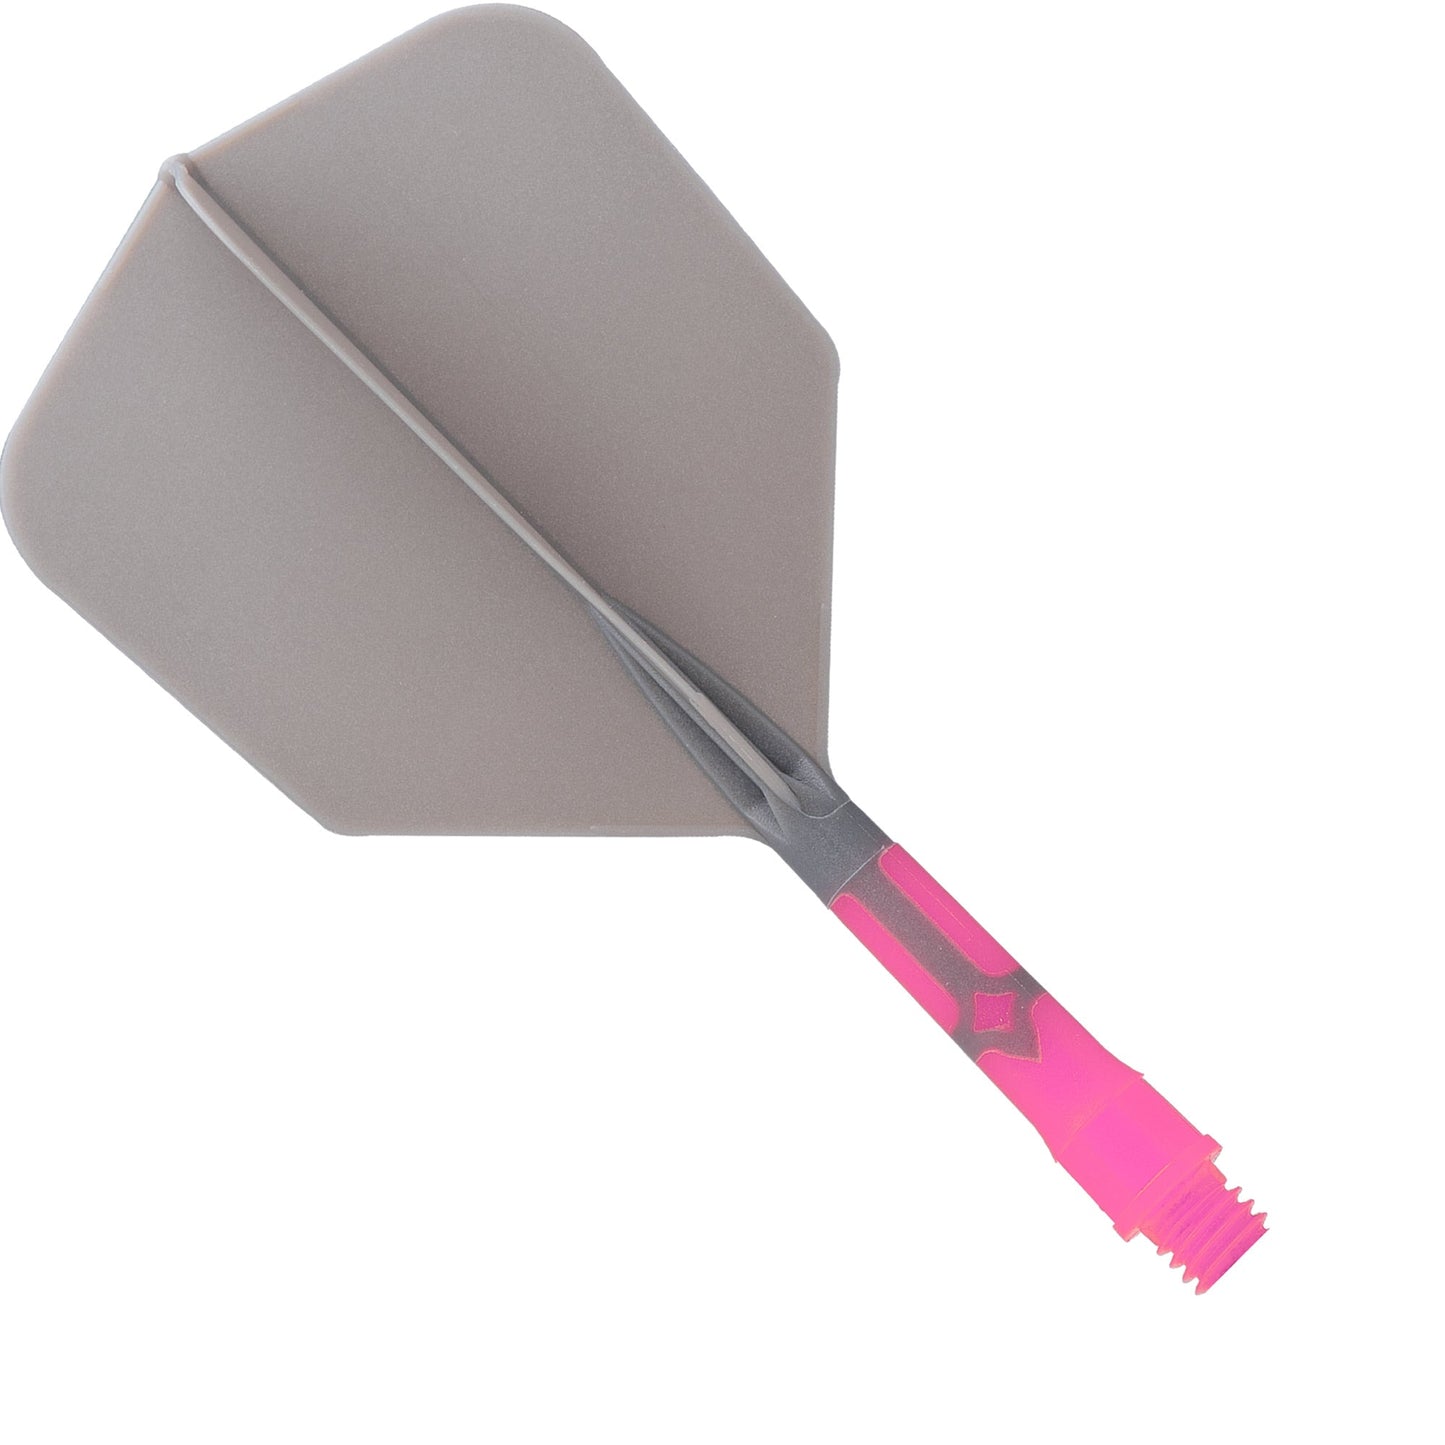 Cuesoul Rost T19 Integrated Dart Shaft and Flights - Big Wing - Pink with Grey Flight Short